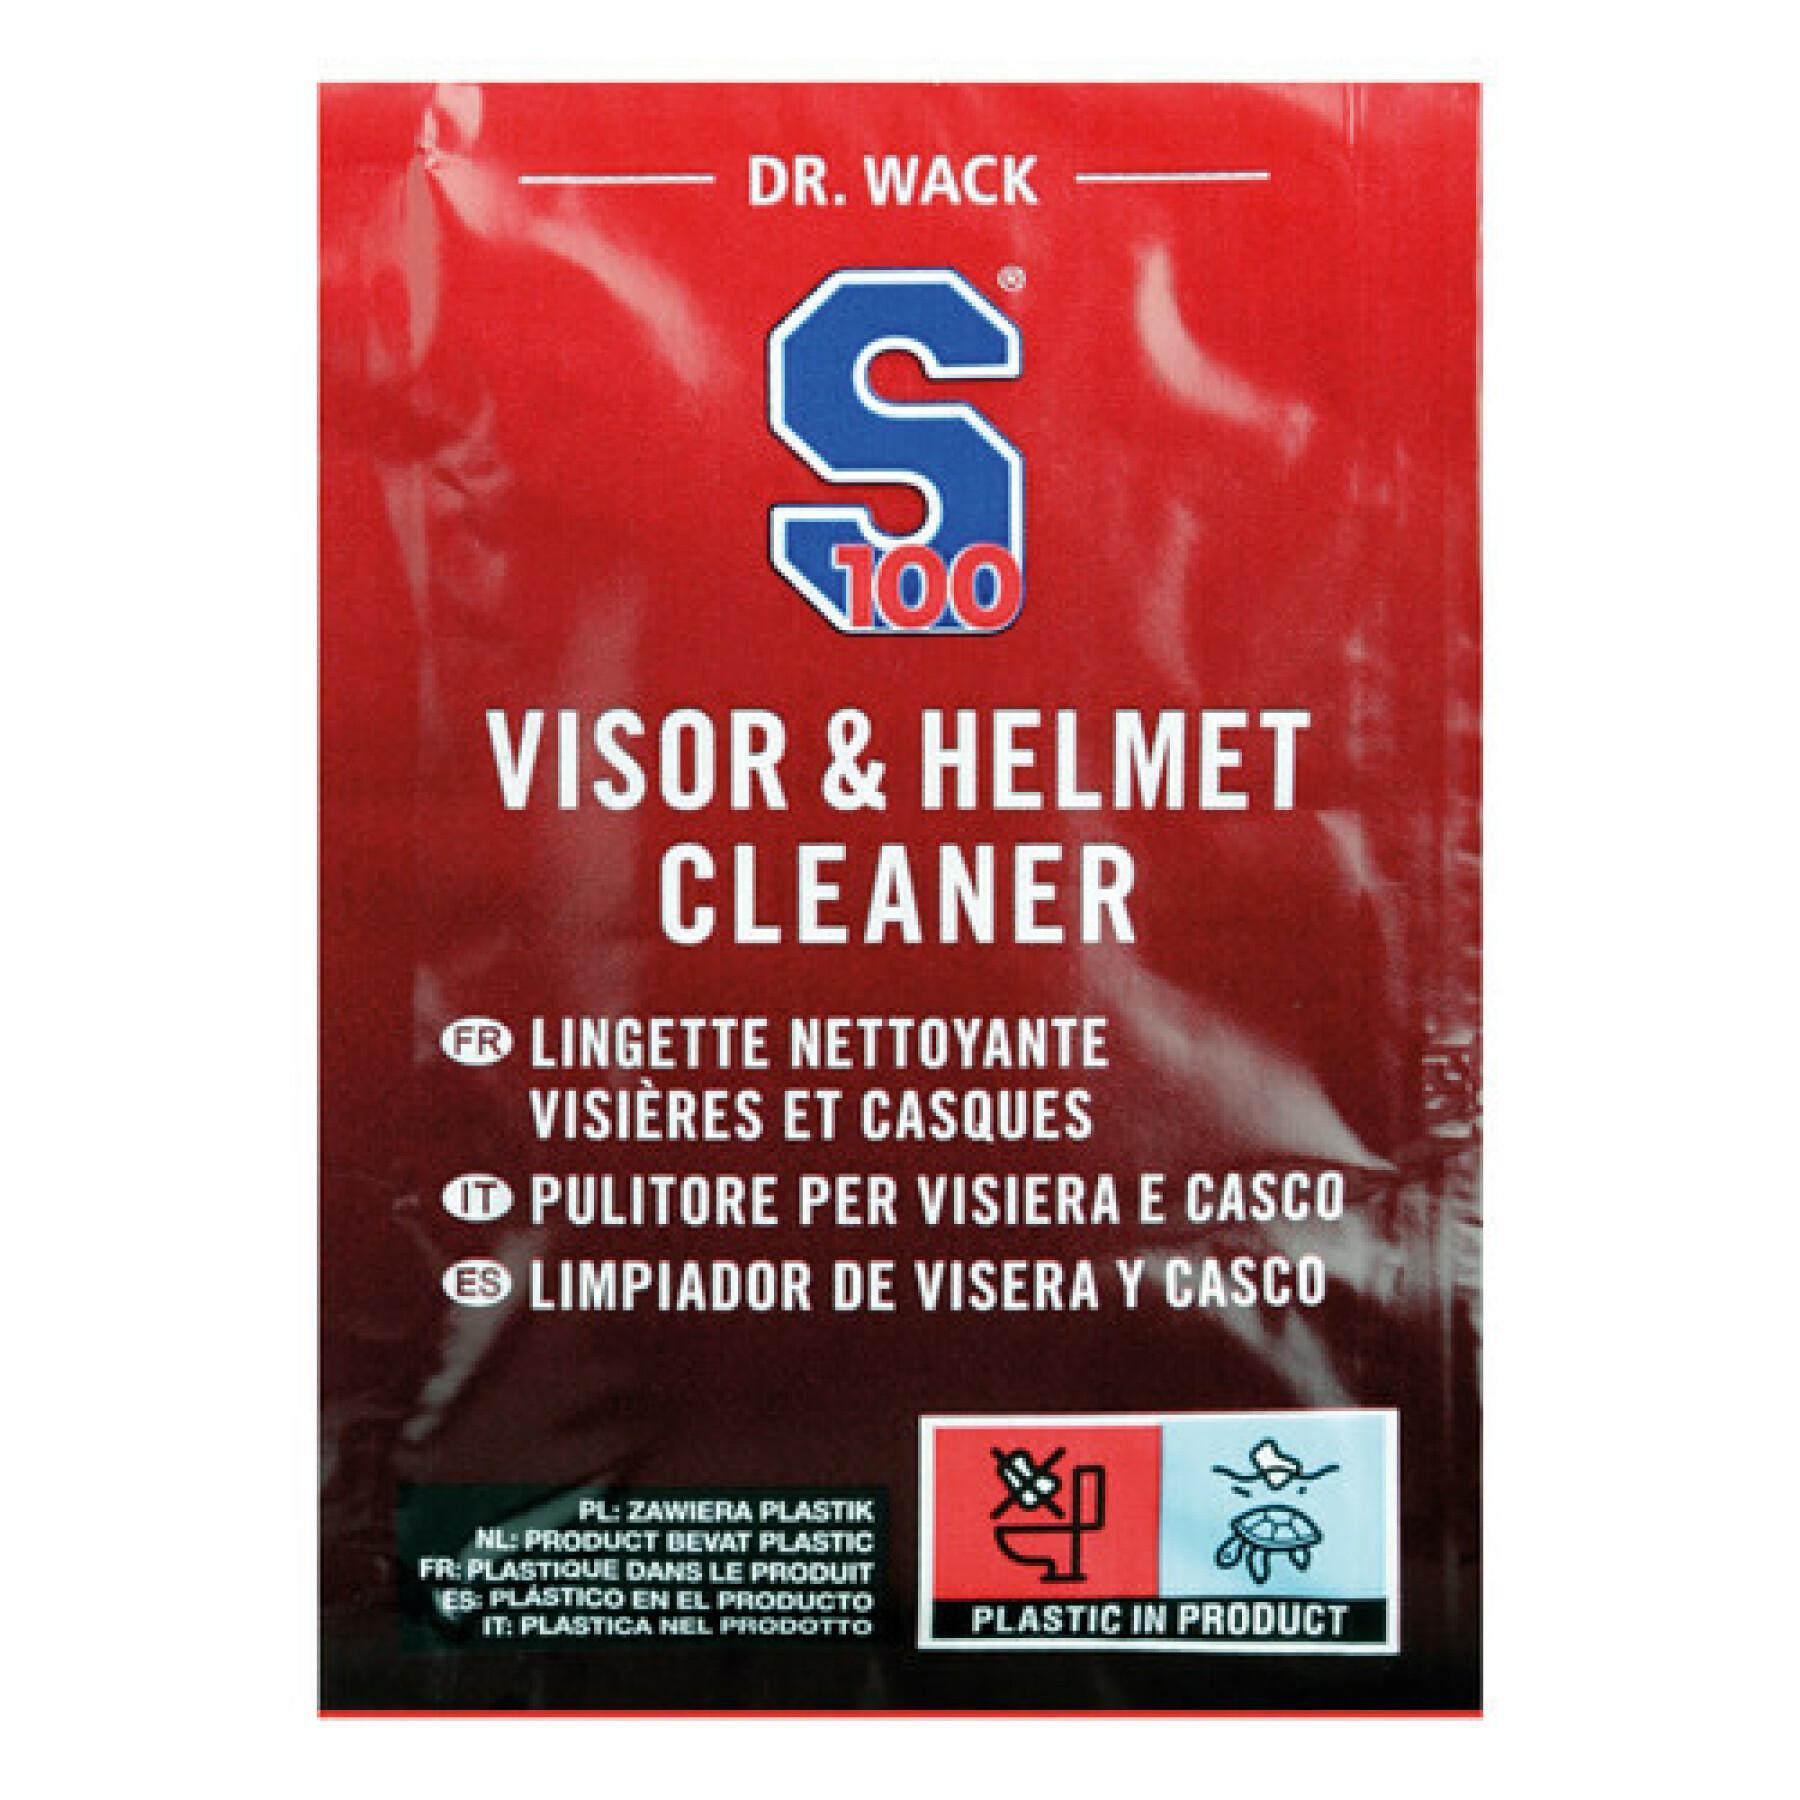 Cleaning wipes for visors and helmets Dr Wack S100